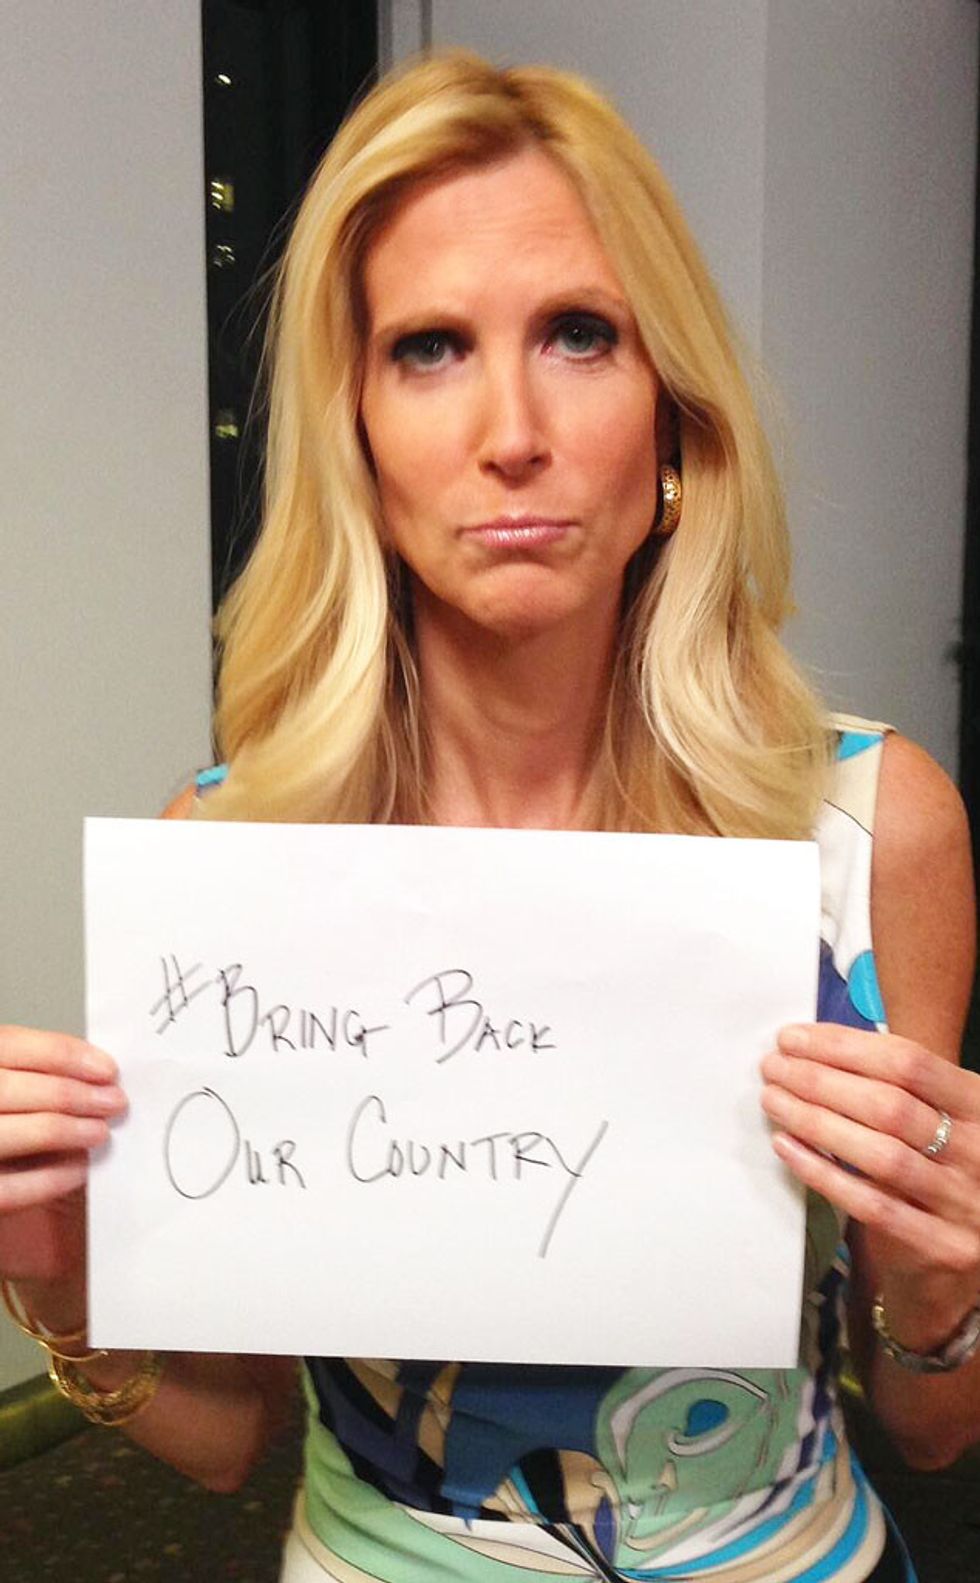 Ann Coulter Continues Her 'Not Sure If Trolling?' Summer Tour